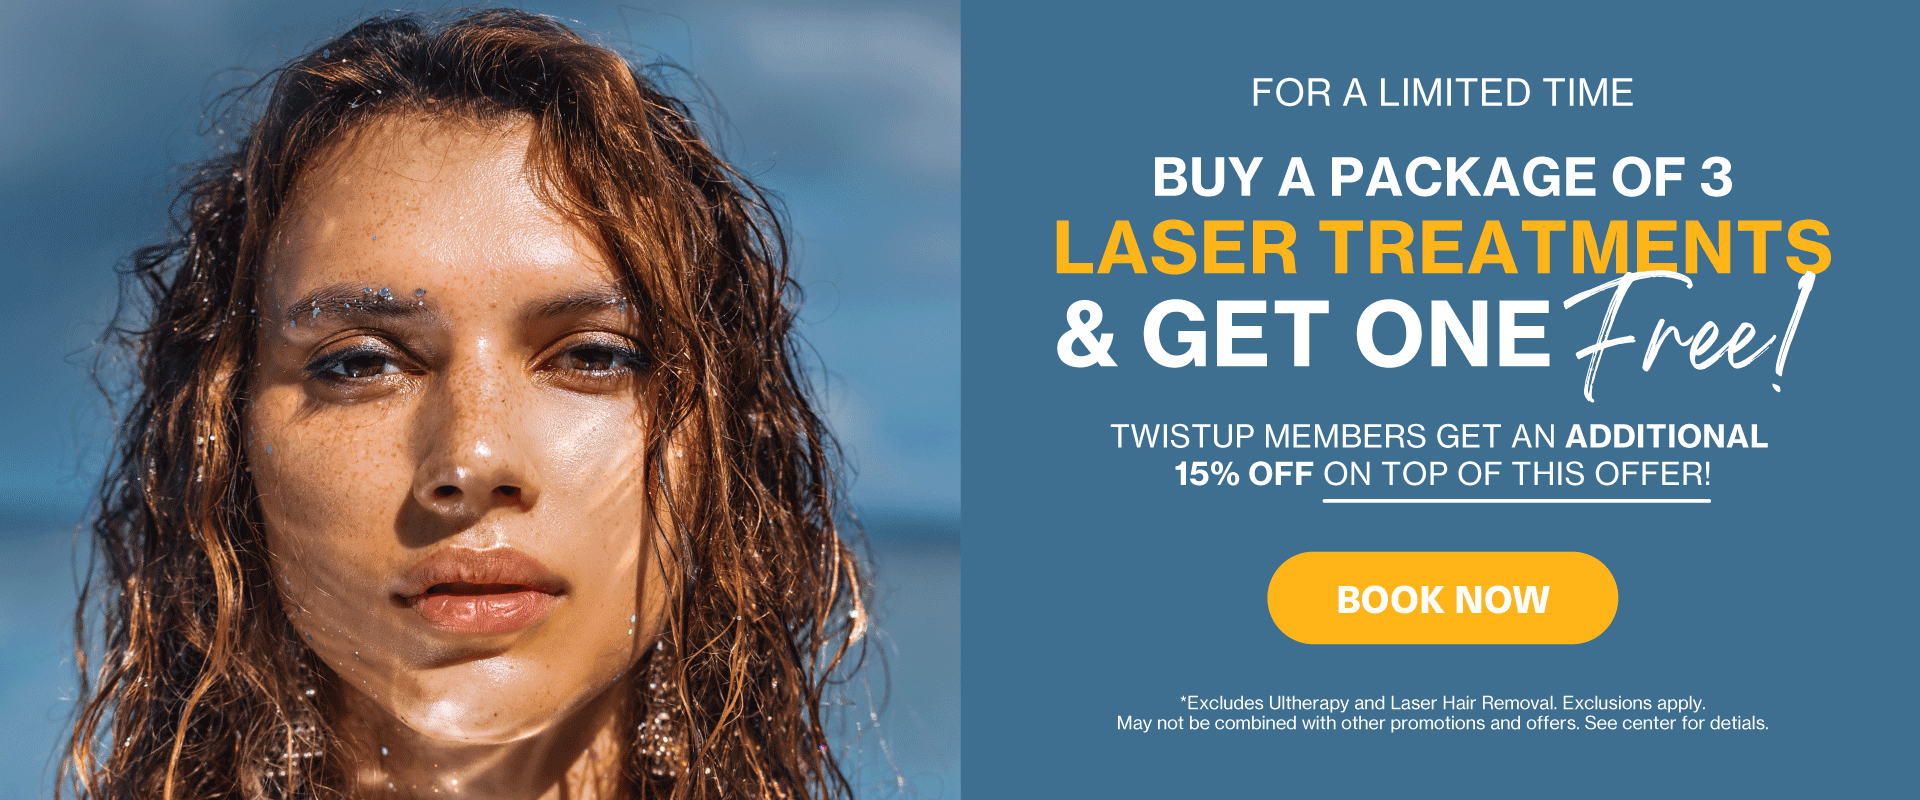 Buy a package of 3 laser treatments and get one free